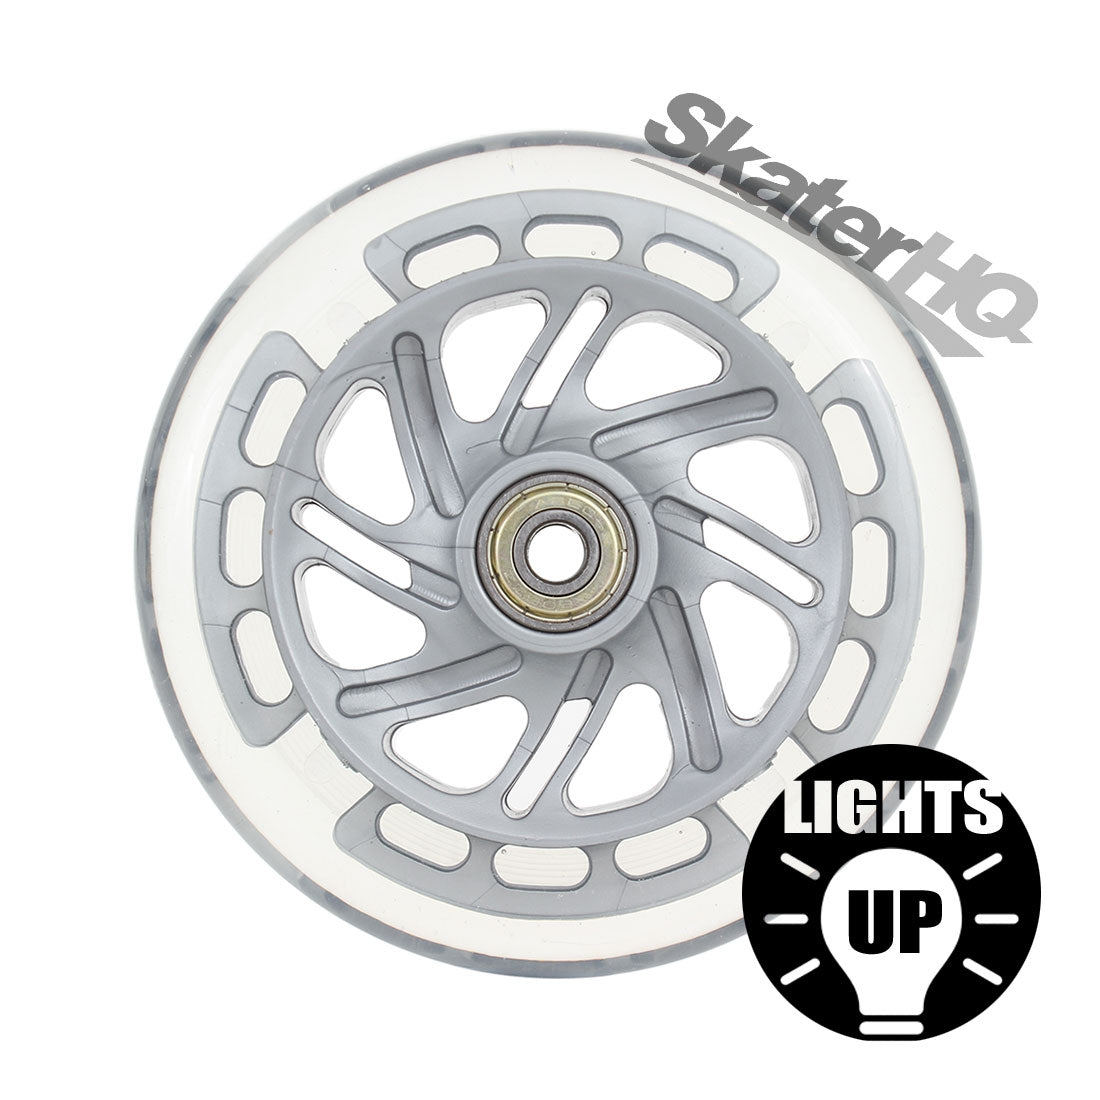 Micro LED 120mm Wheel 2pk - Clear/Grey Scooter Wheels